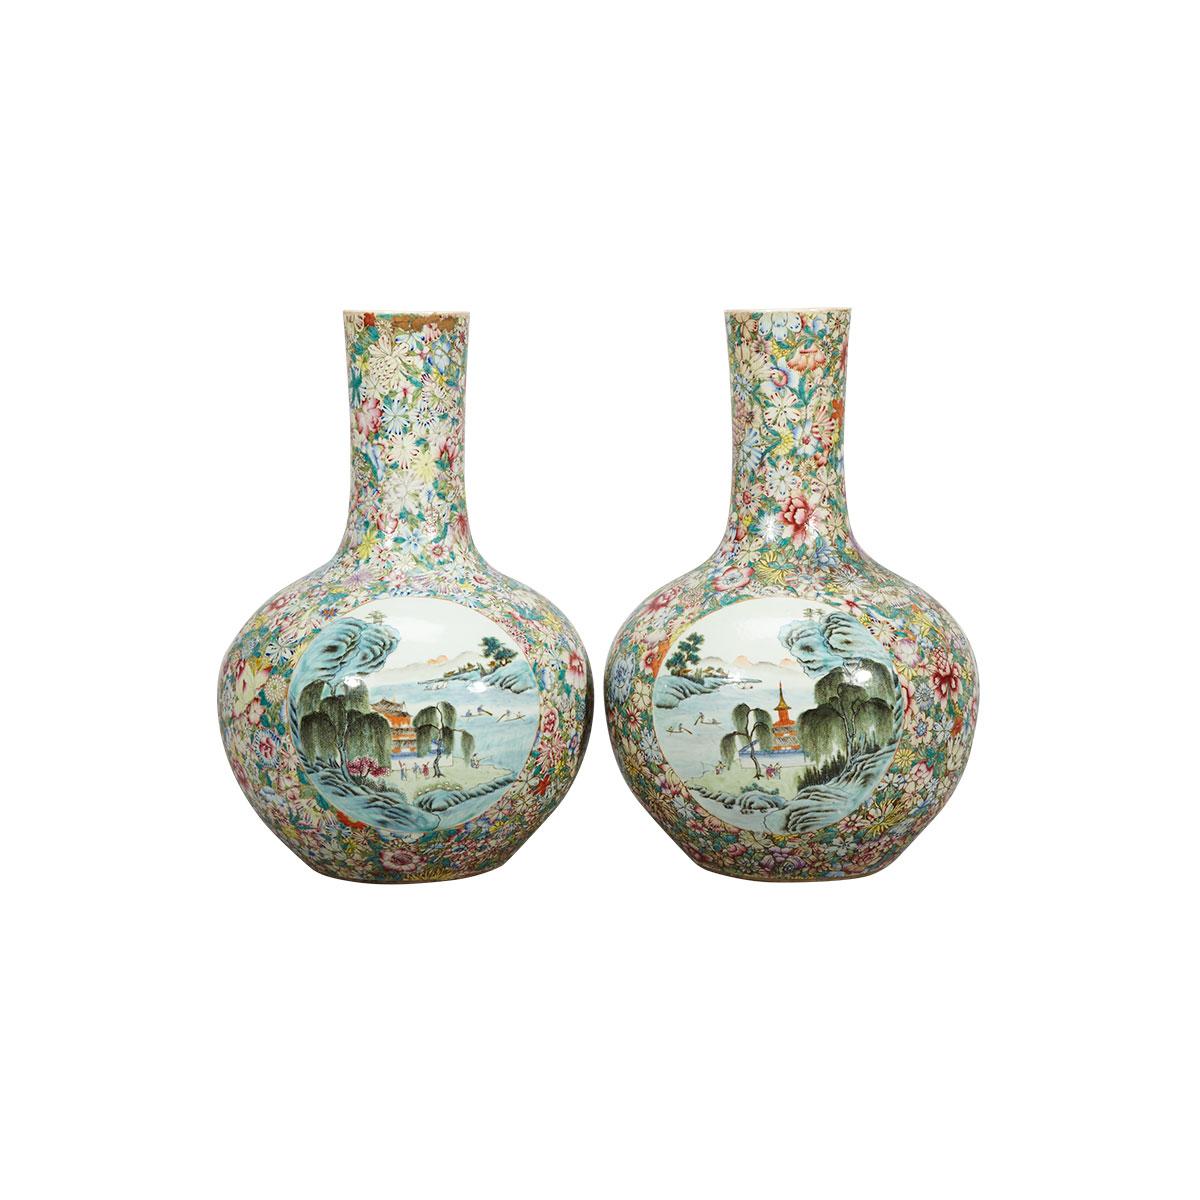 Pair of Large Famille Rose Baluster ‘Landscape’ Vases, Late Republican Period